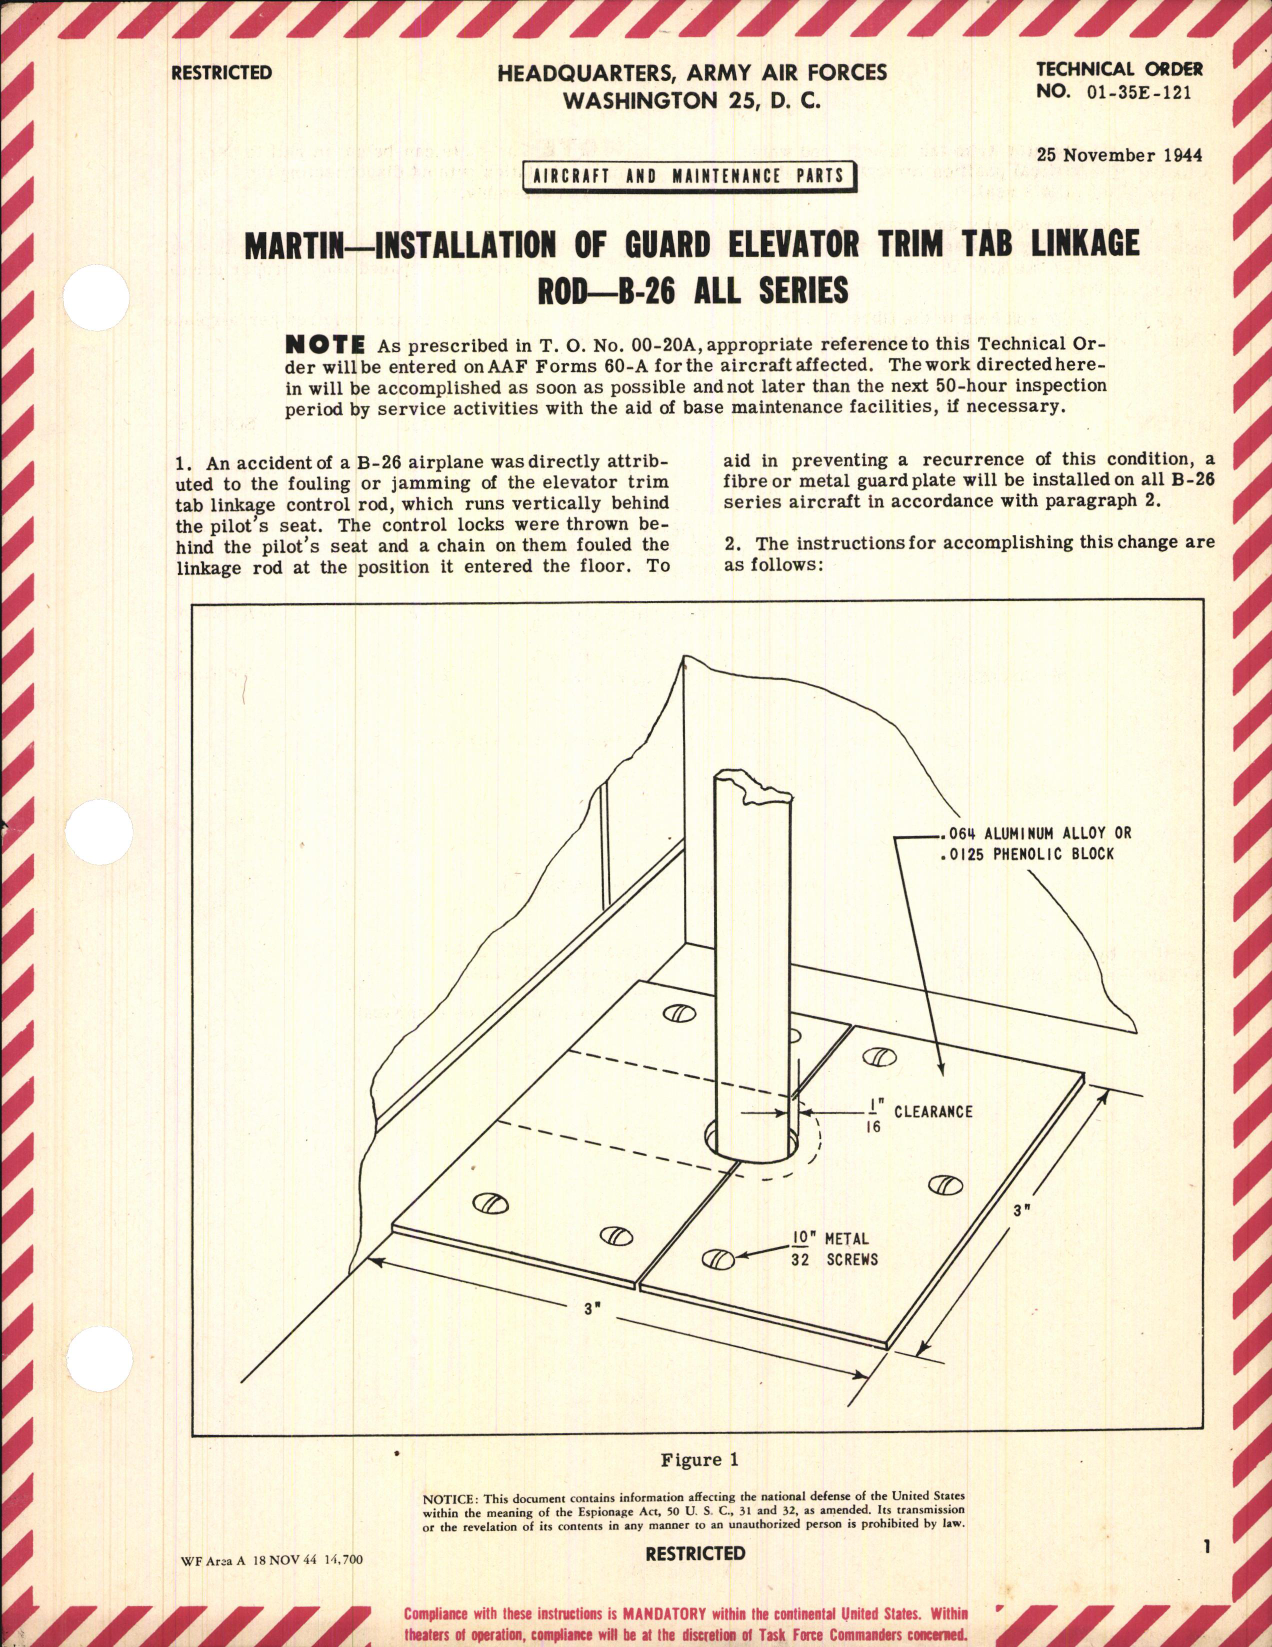 Sample page 1 from AirCorps Library document: Installation of Guard Elevator Trim Tab Linkage Rod for B-26 All Series